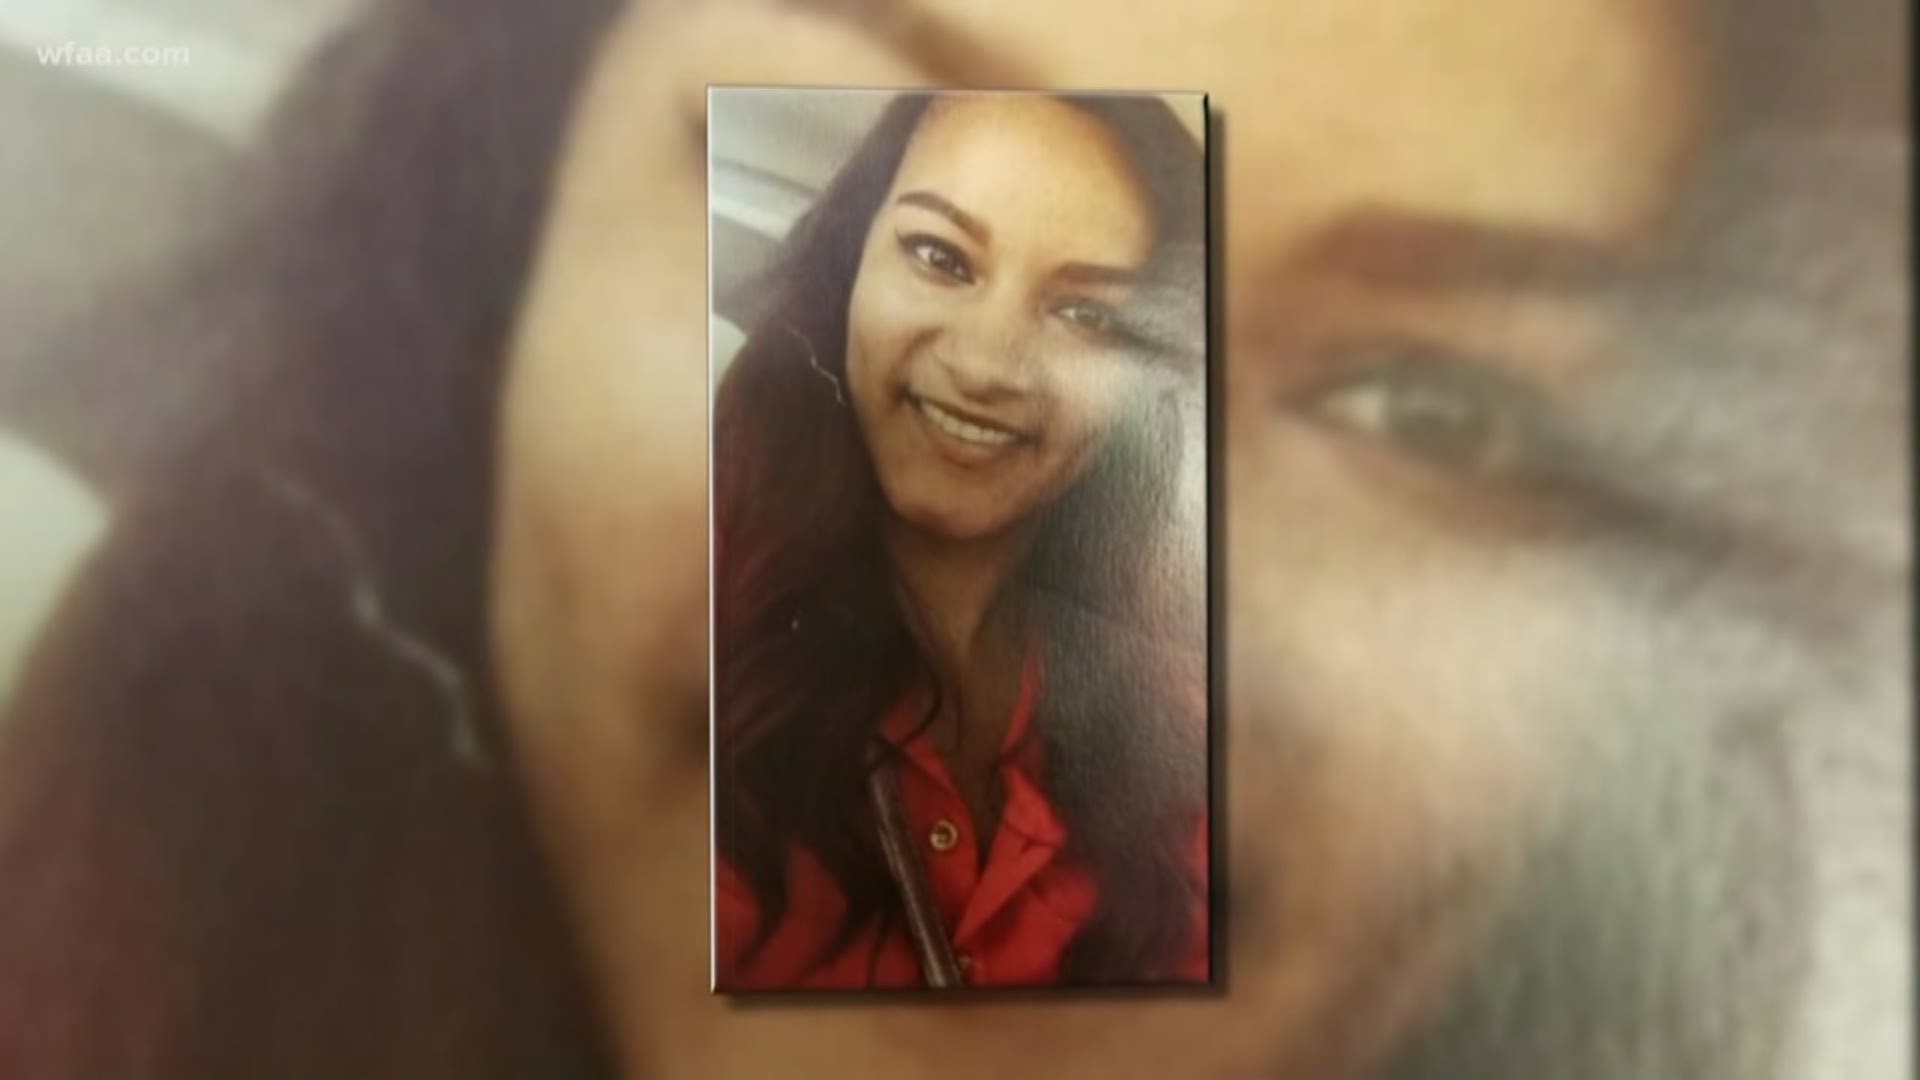 A Tarrant County jury is deliberating whether Christopher Revill kidnapped his ex-girlfriend who has been missing for nearly three years. Revill, 35, is charged with aggravated kidnapping in the disappearance of Typhenie Johnson in October 2016. She has not been seen or heard from since, and her loved ones continue to look for her.